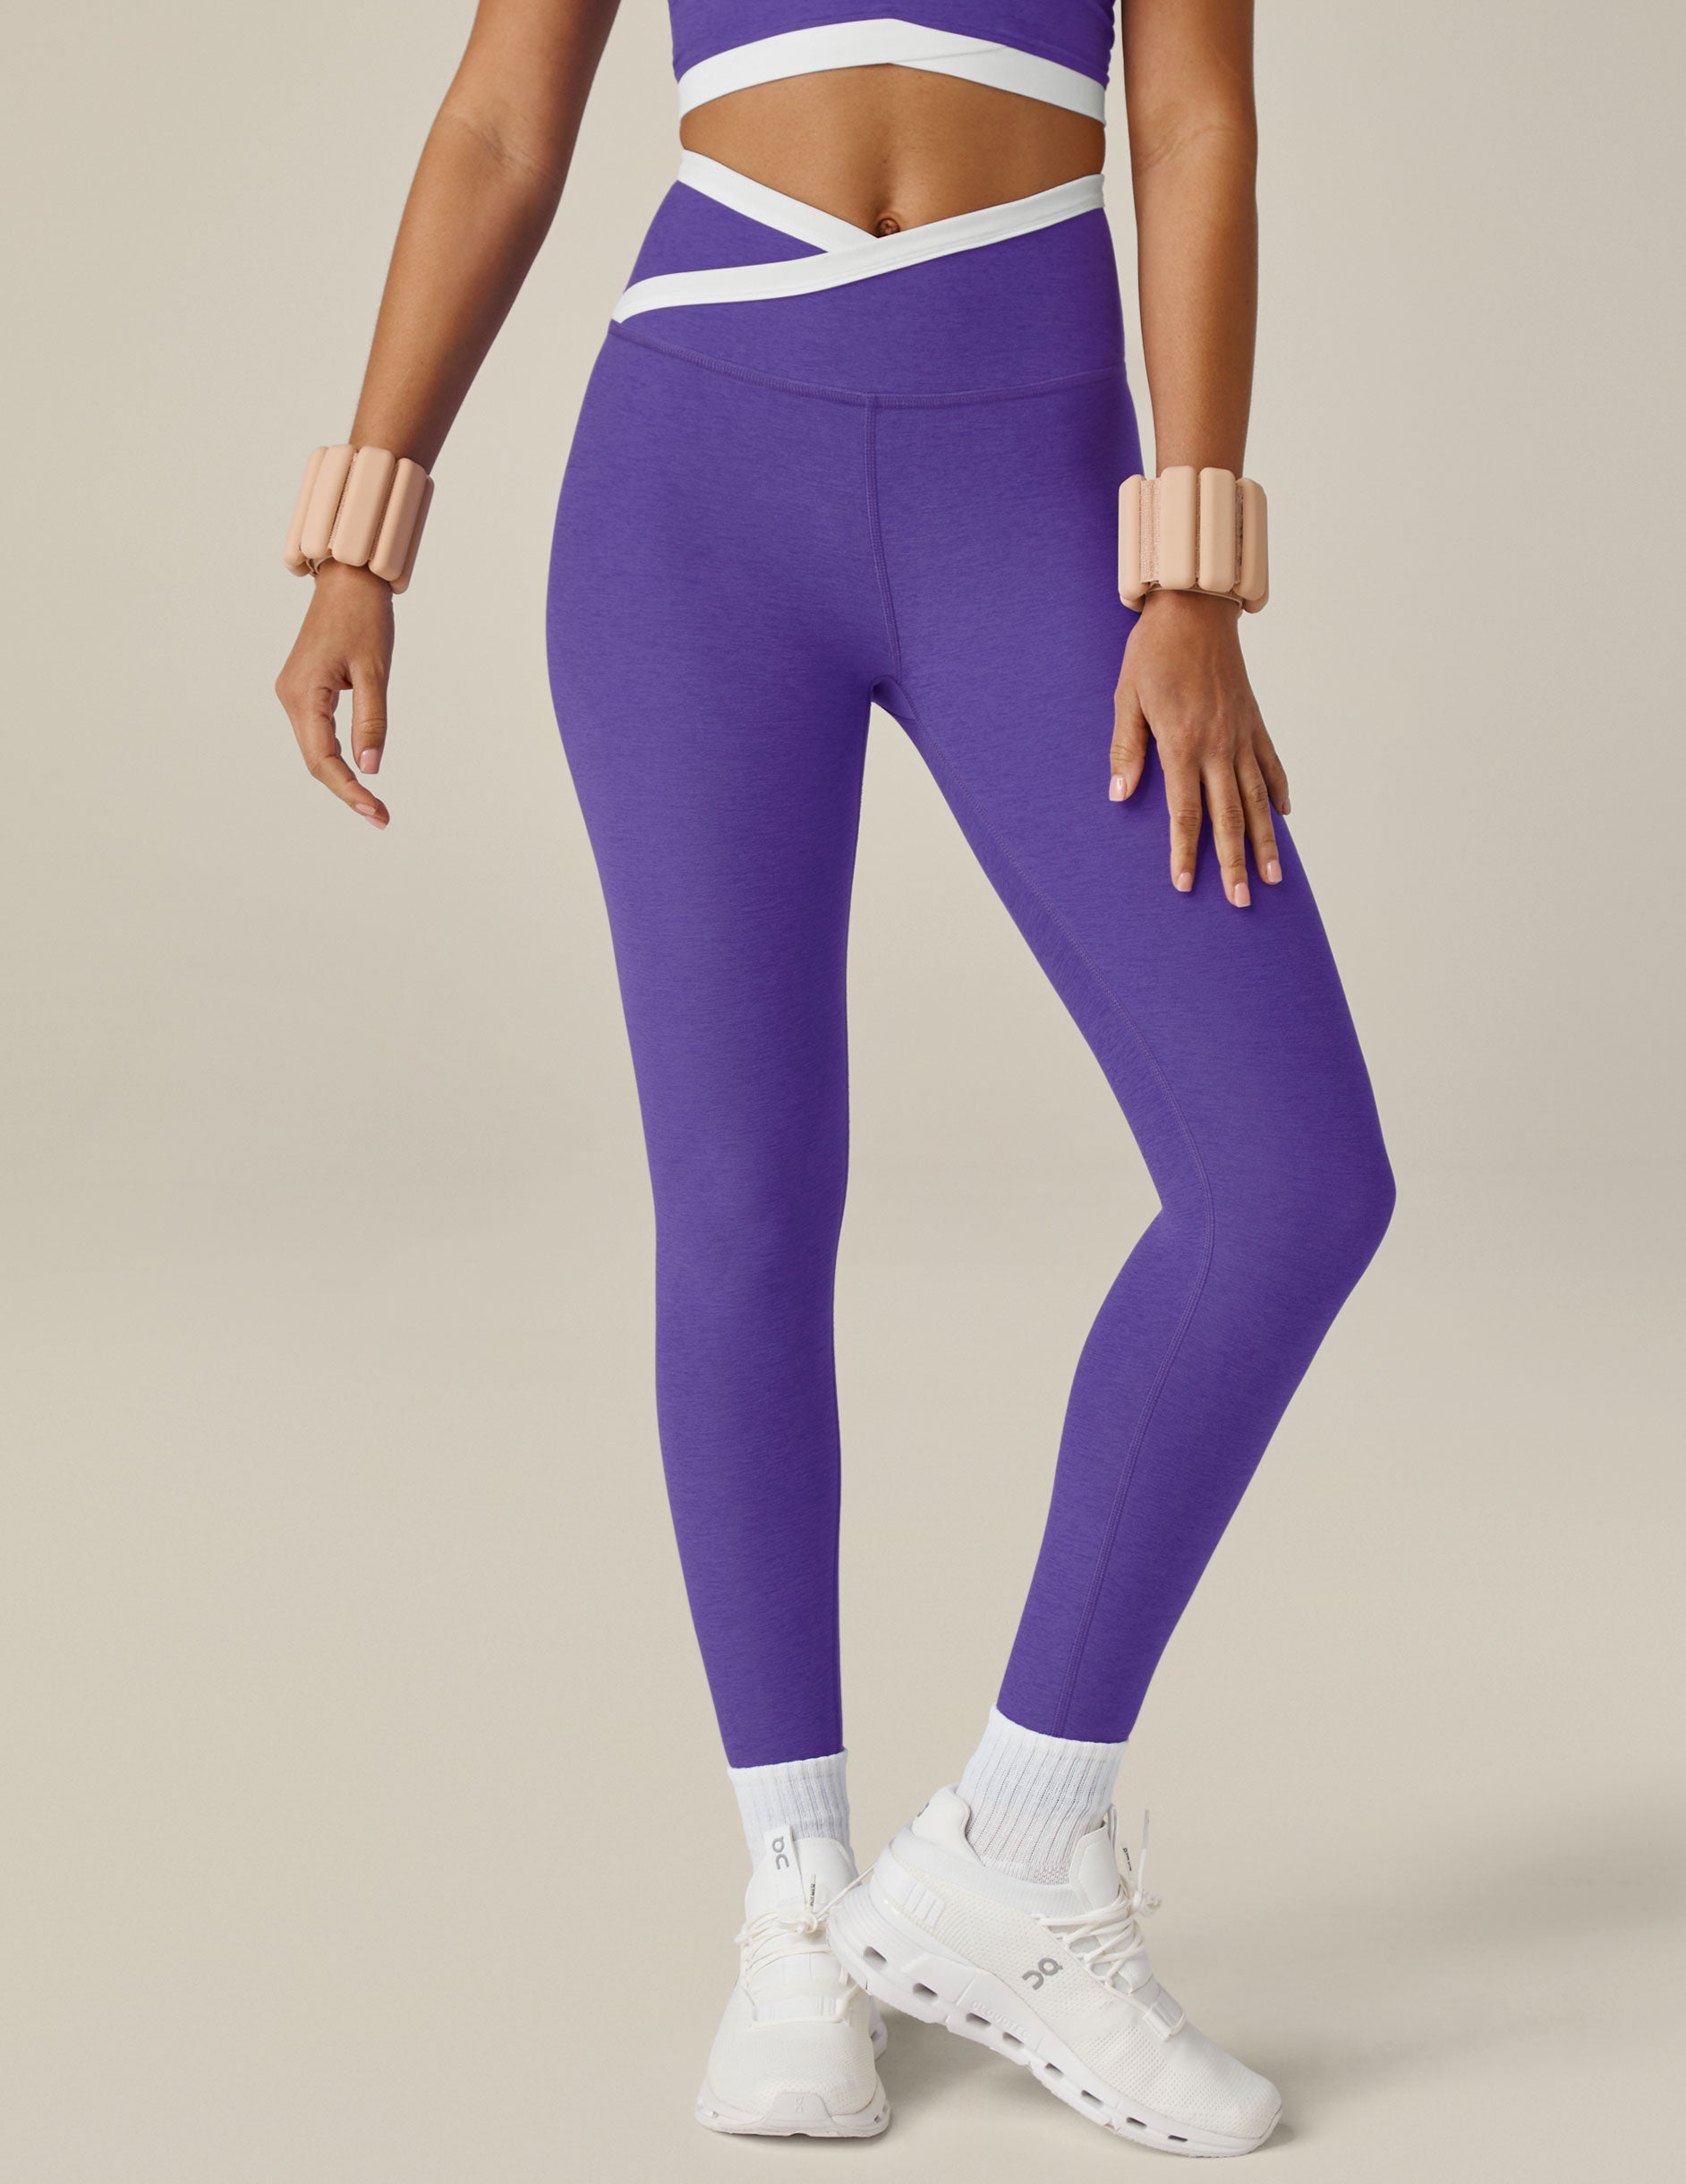 purple and white outline midi legging with criss cross fron